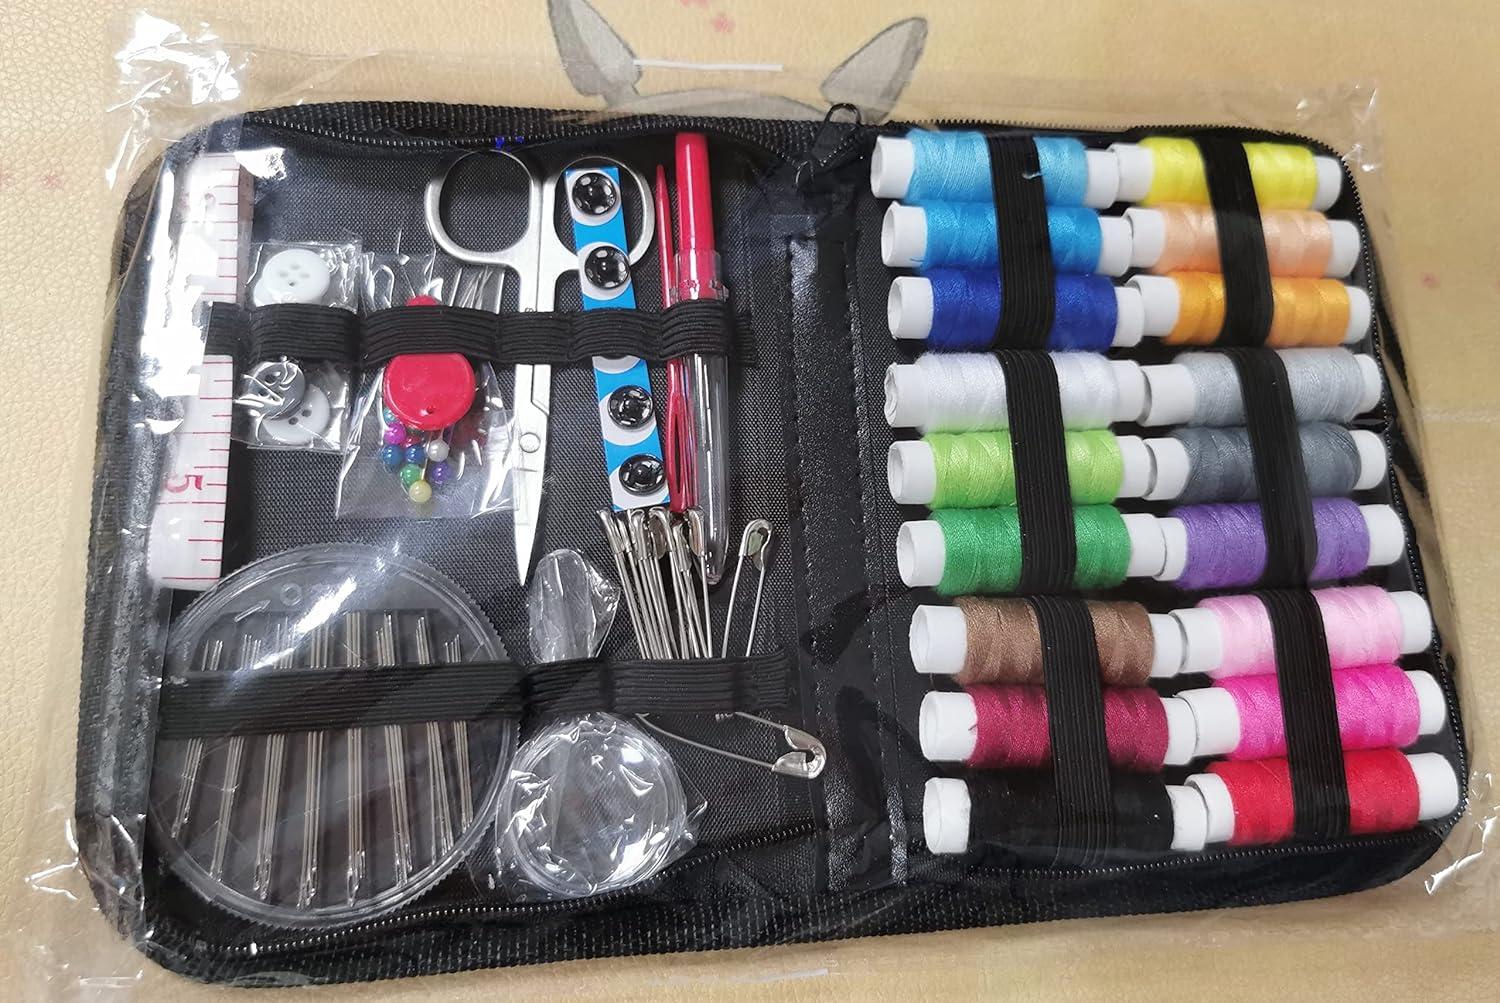 JUNING Sewing Kit with Case Portable Sewing Supplies for Home Traveler,  Adults, Beginner, Emergency, Kids Contains Thread, Scissors, Needles,  Measure